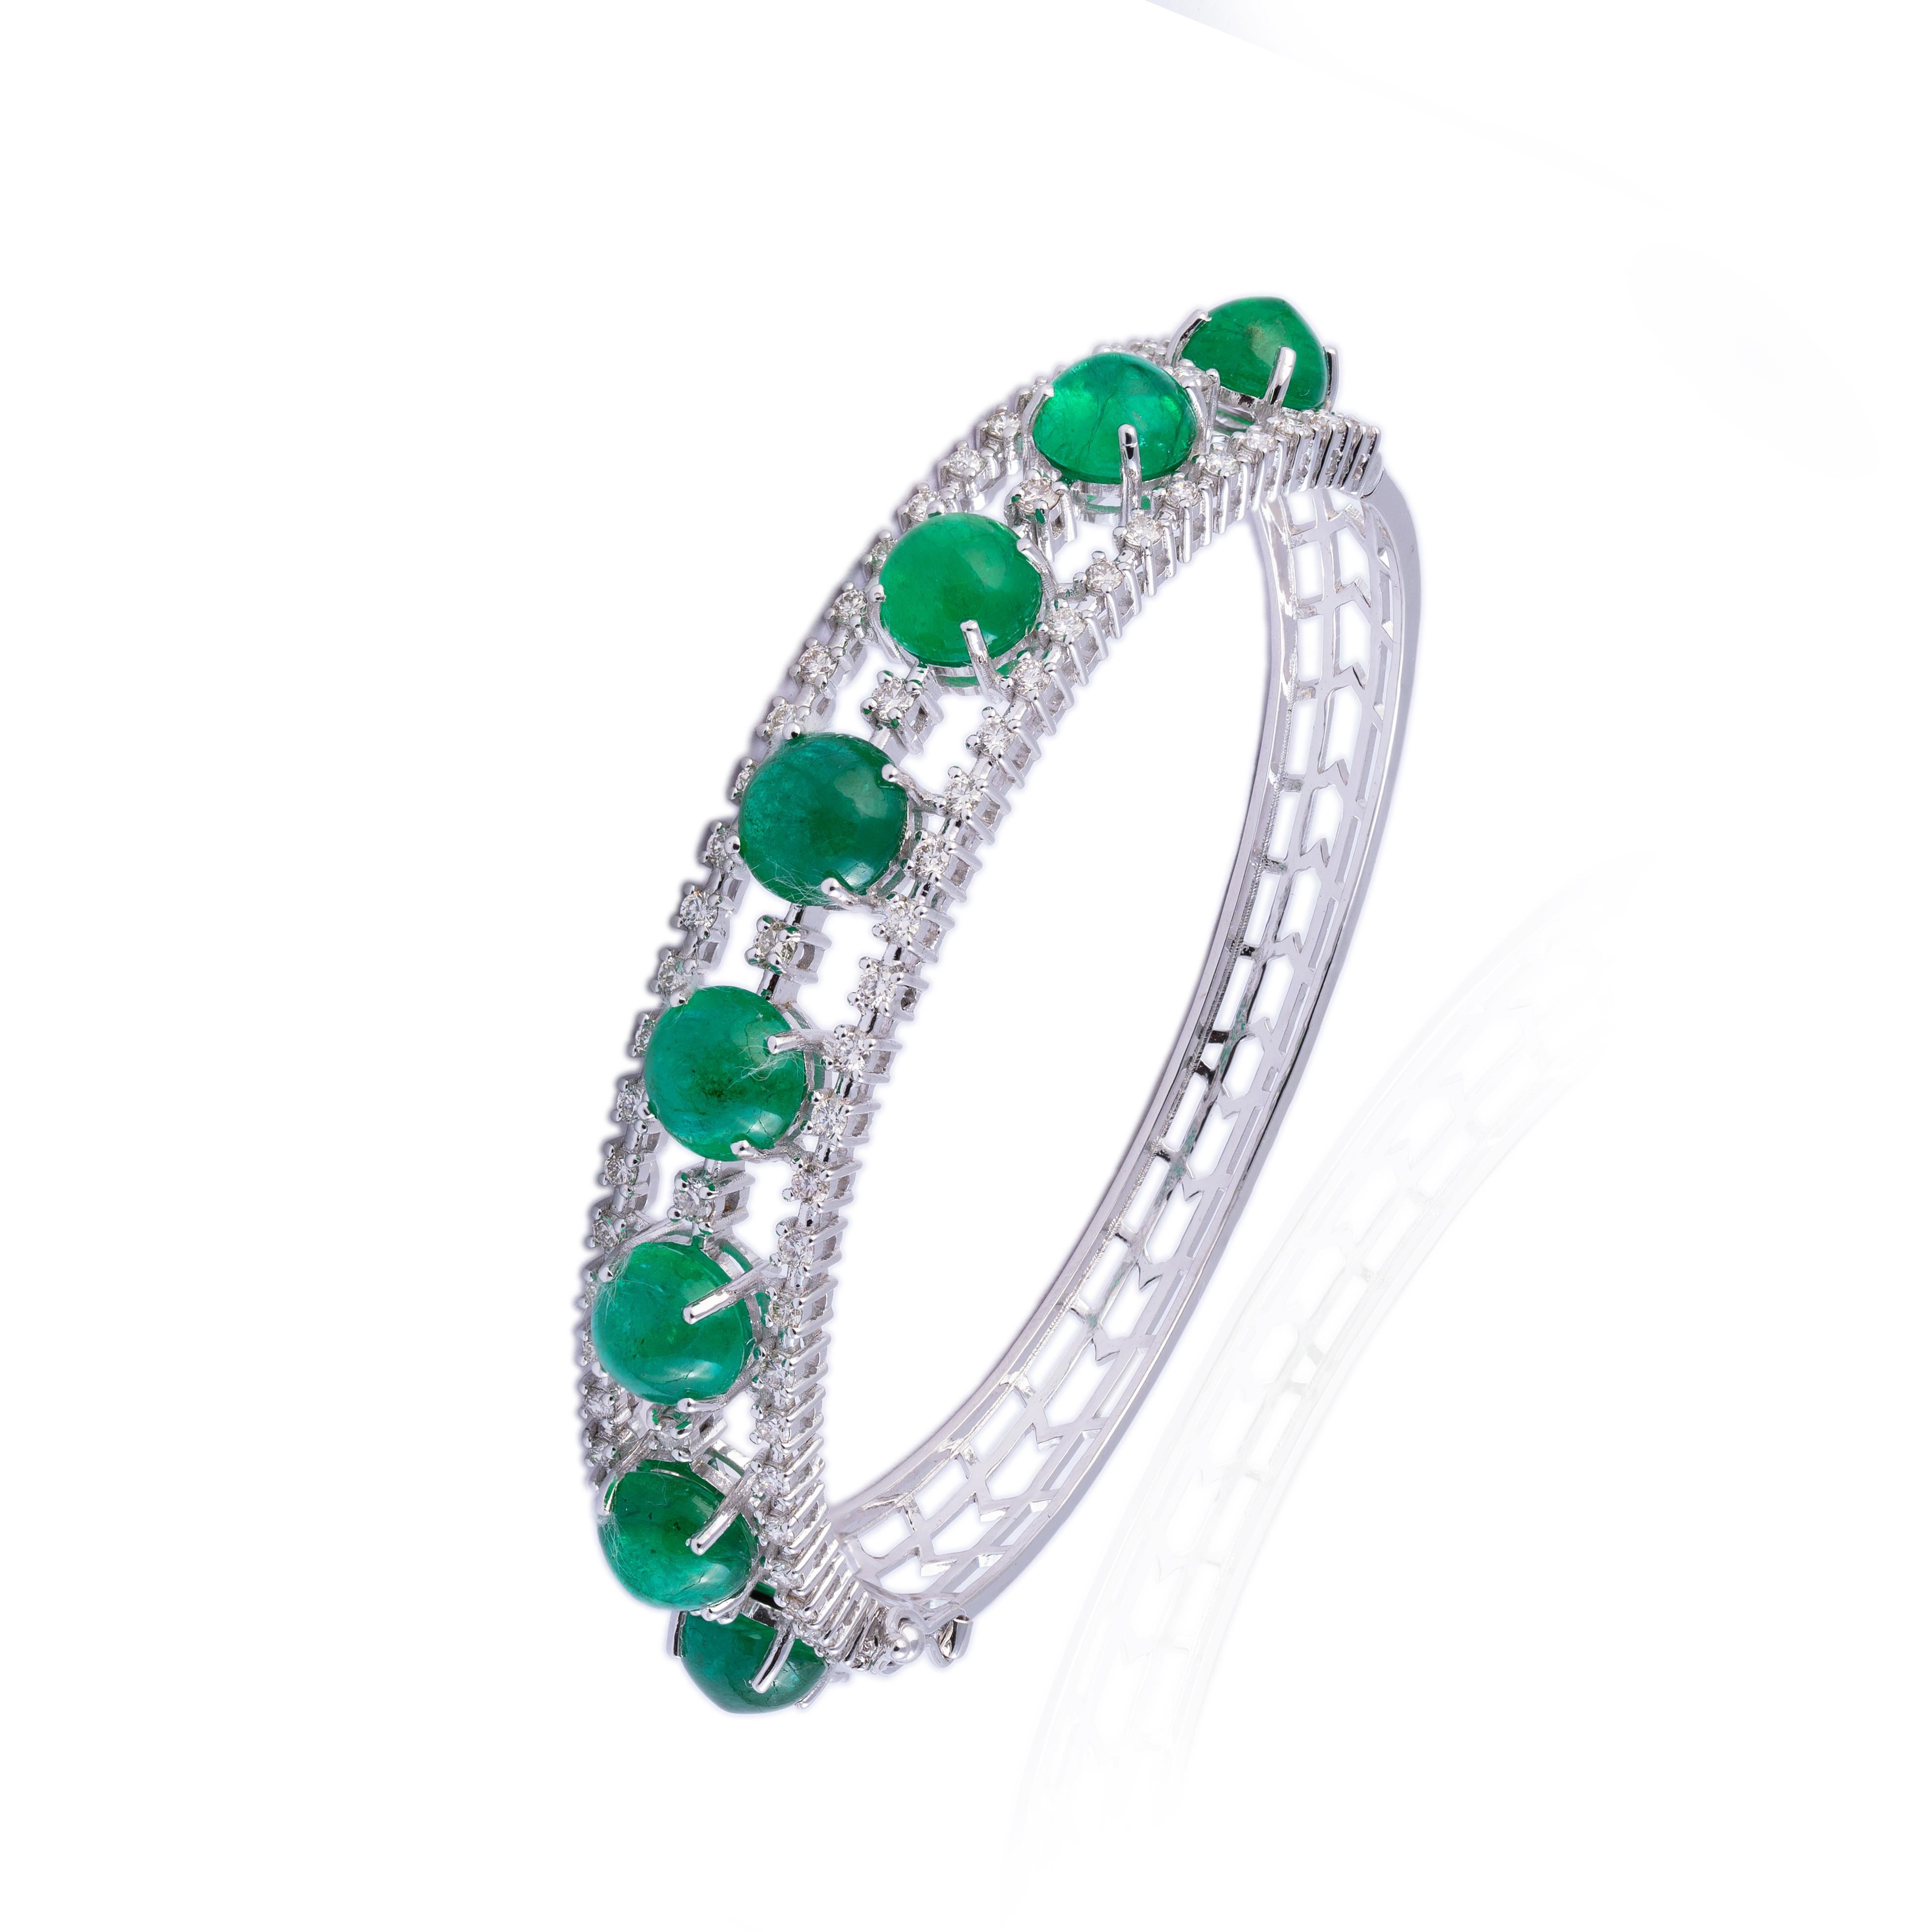 this is a very elegant natural emerald and diamond bracelet in 14k gold. the e.eralds are caboshans of very high quality.

emeralds : 15.18 cts
diamonds : 1.59 cts
gold : 17.49 gms

Its very hard to capture the true color and luster of the stone, I